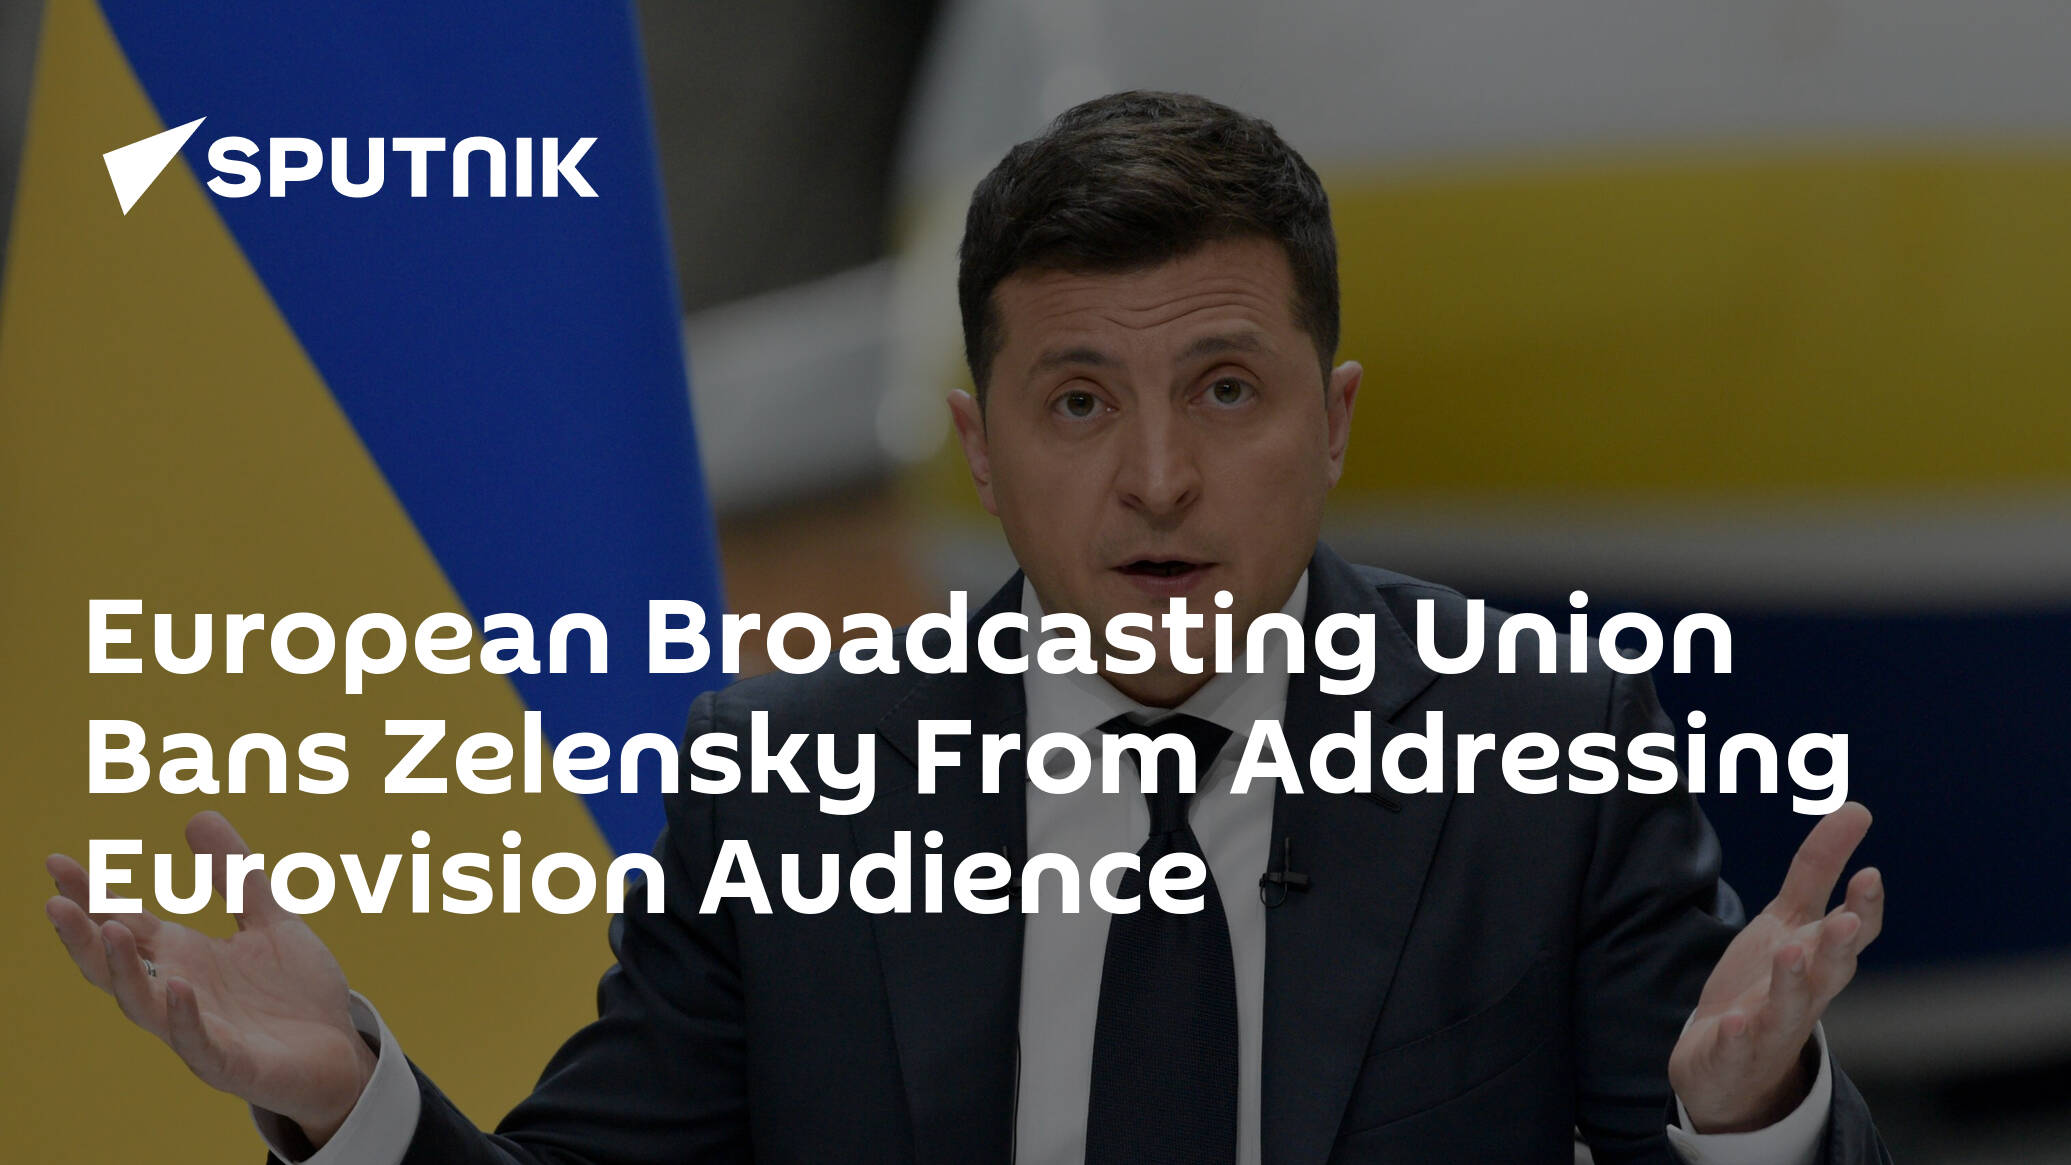 European Broadcasting Union Bans Zelensky From Addressing Eurovision Audience